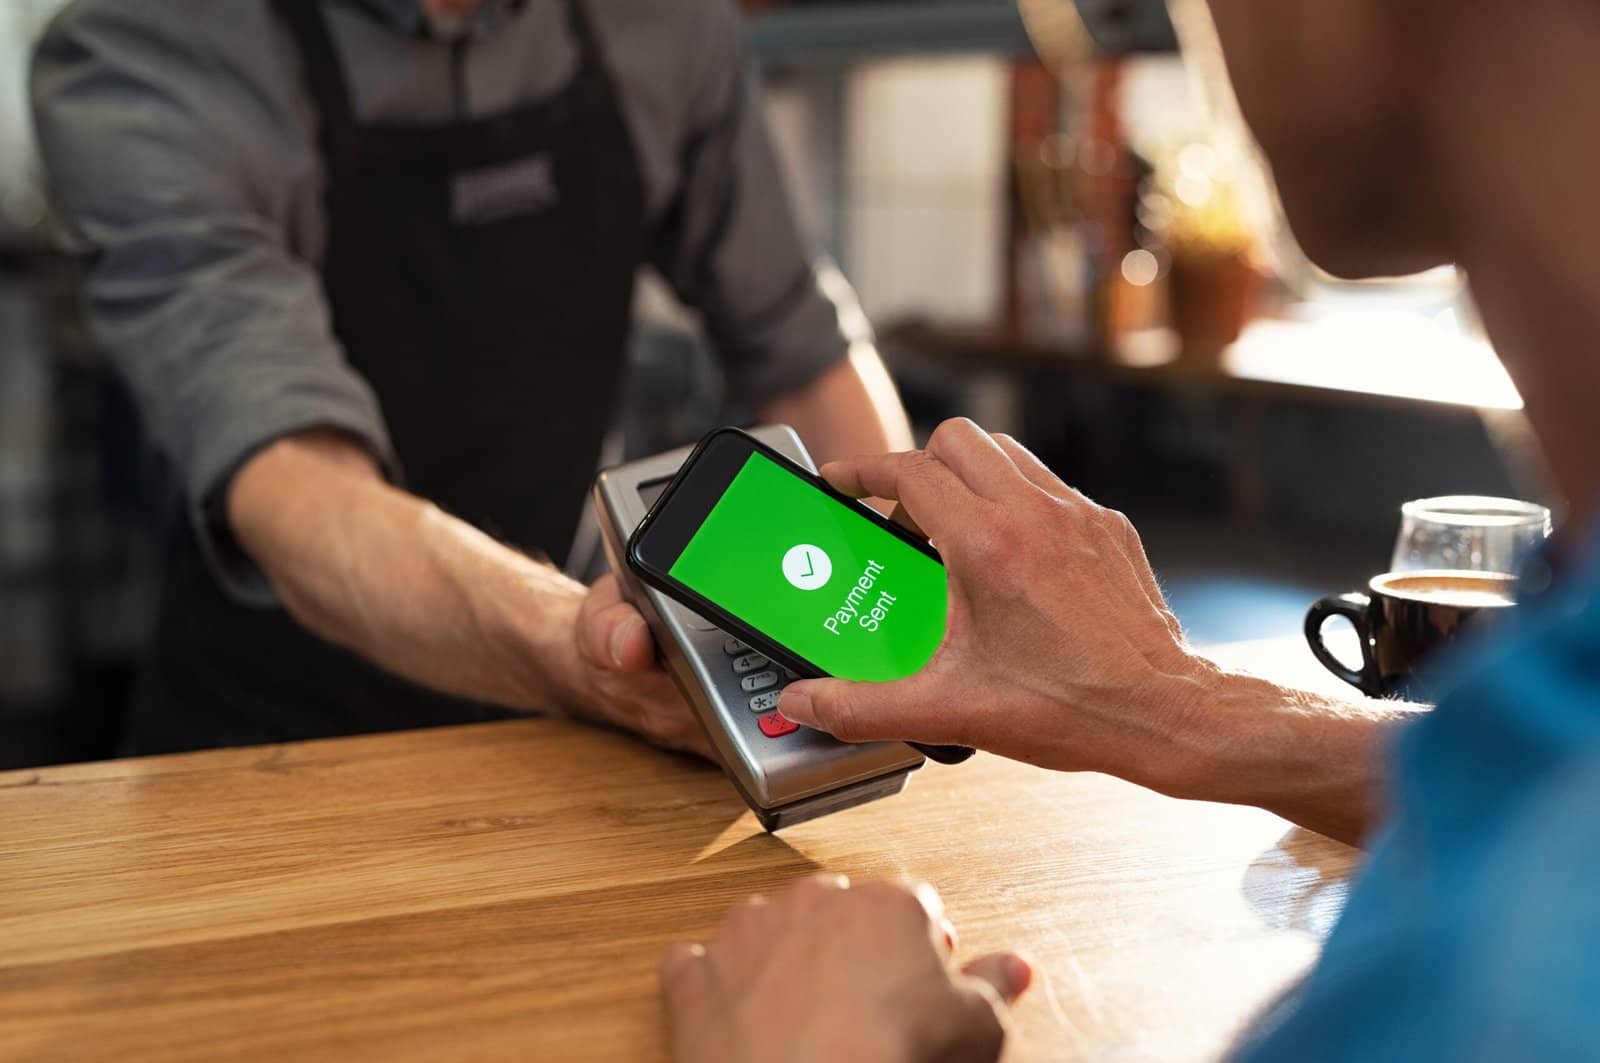 Customer paying bill through smartphone using NFC technology. Closeup of hand making payment through contactless machine. Woman hand holding mobile phone with green screen and paying the bill with contact less technology.